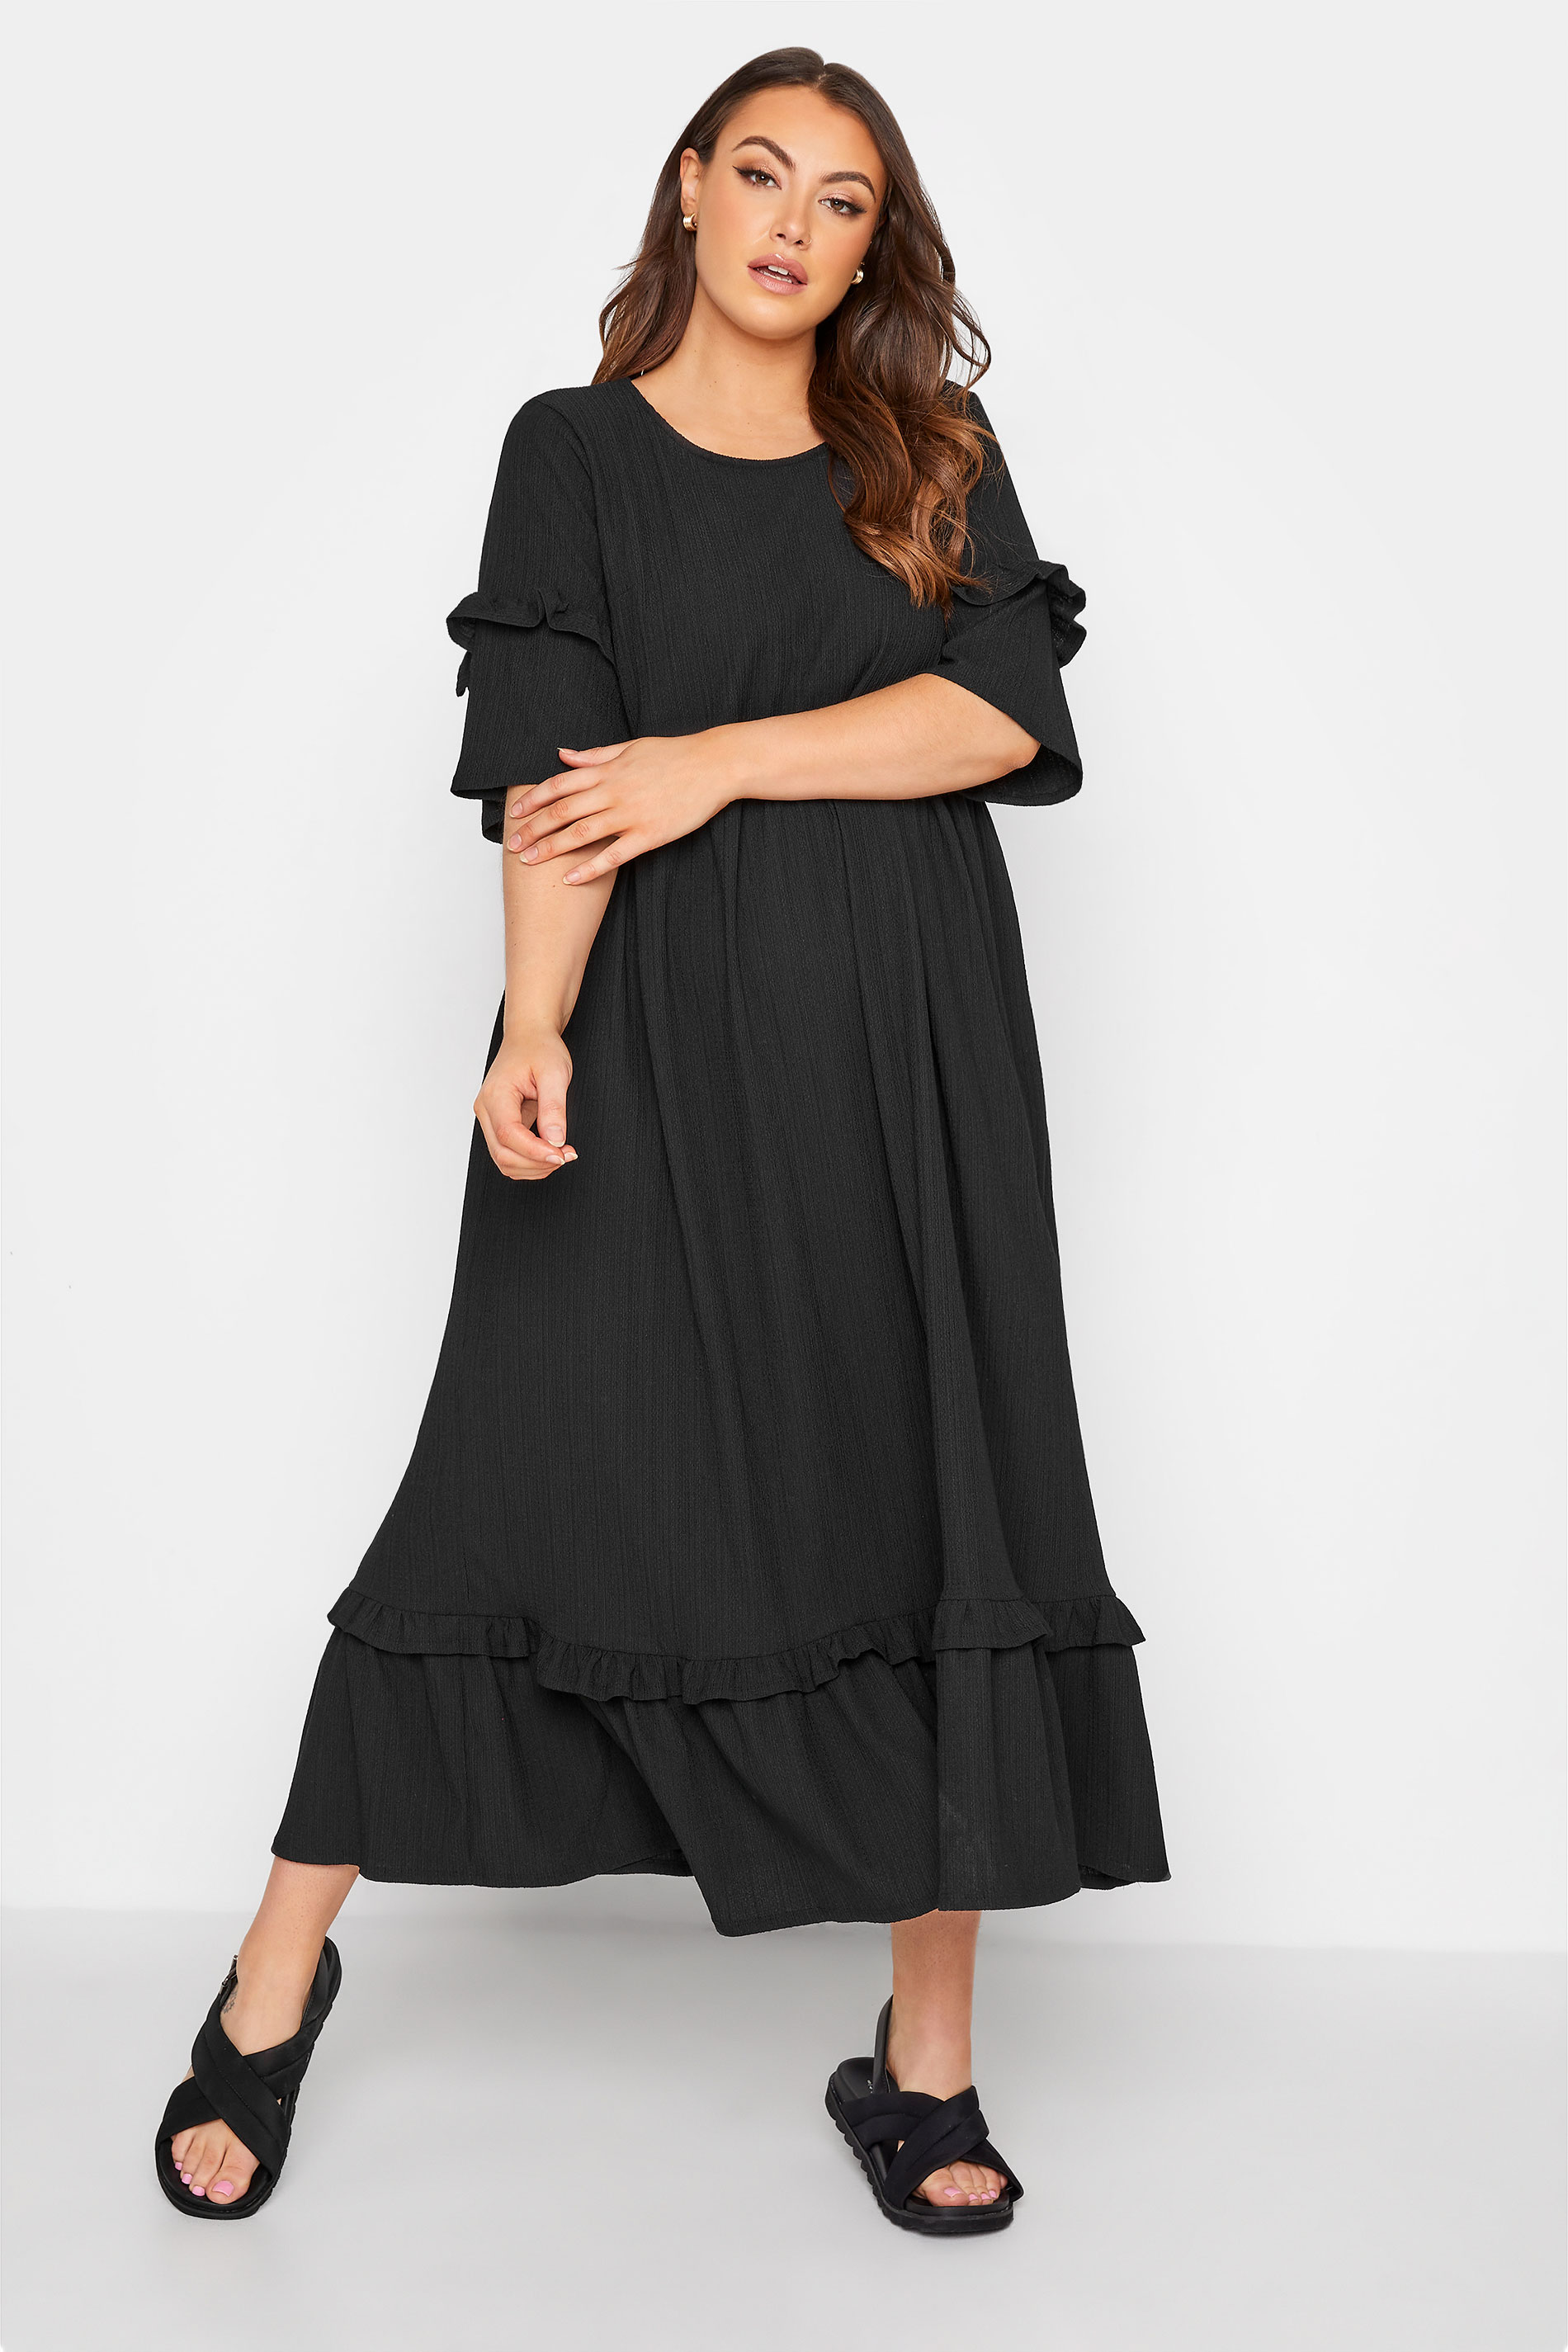 LIMITED COLLECTION Curve Black Smock Maxi Dress_A.jpg